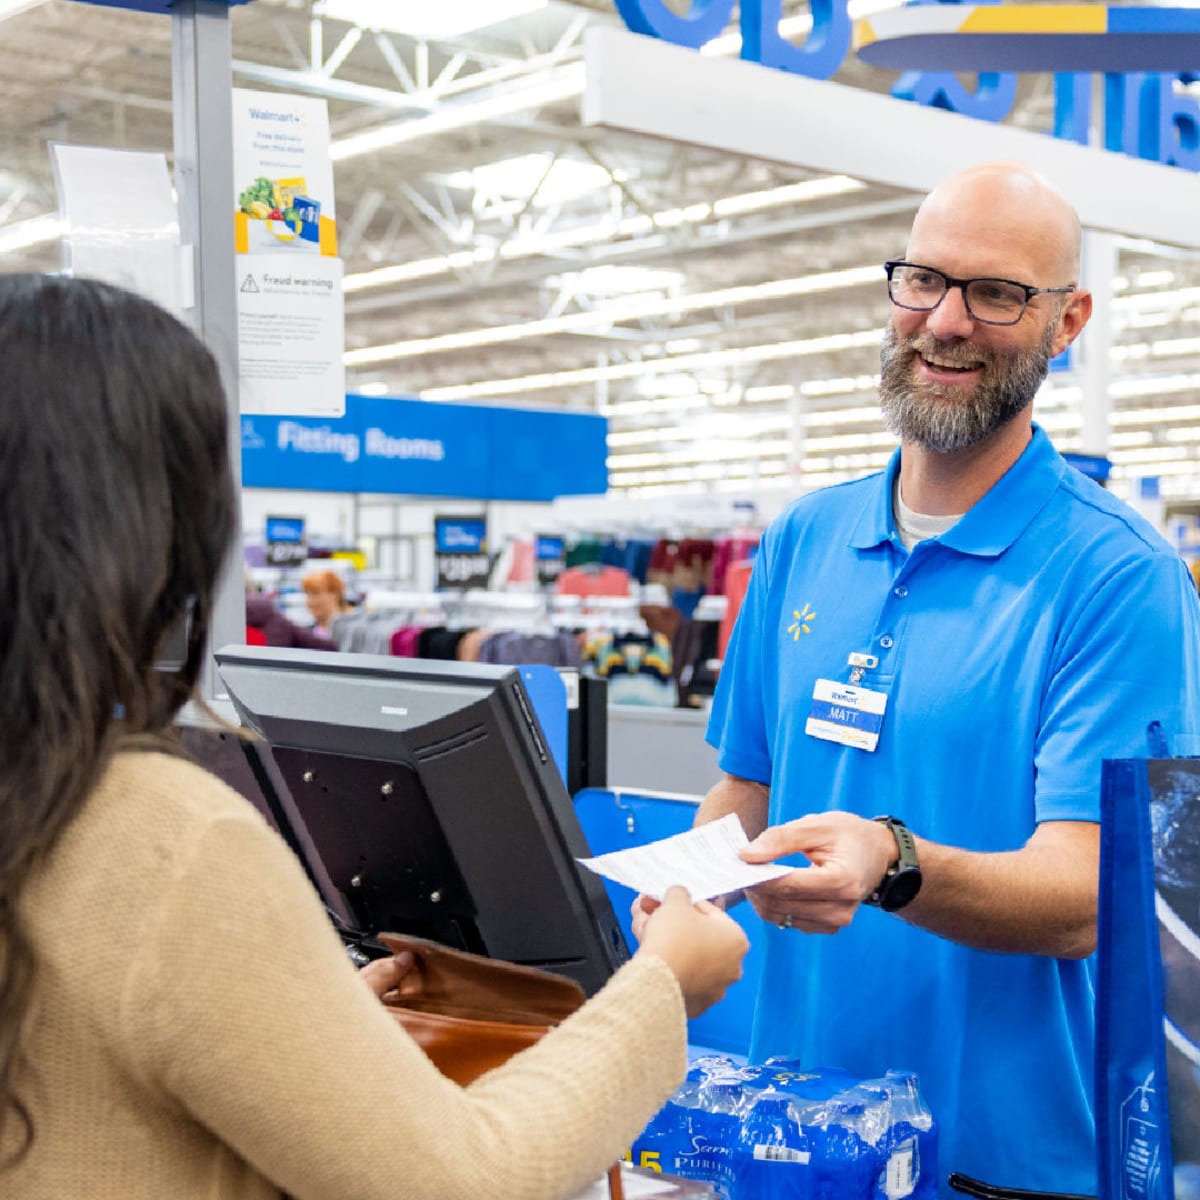 Walmart Is Making a Change at the Checkout Customers May Not Like